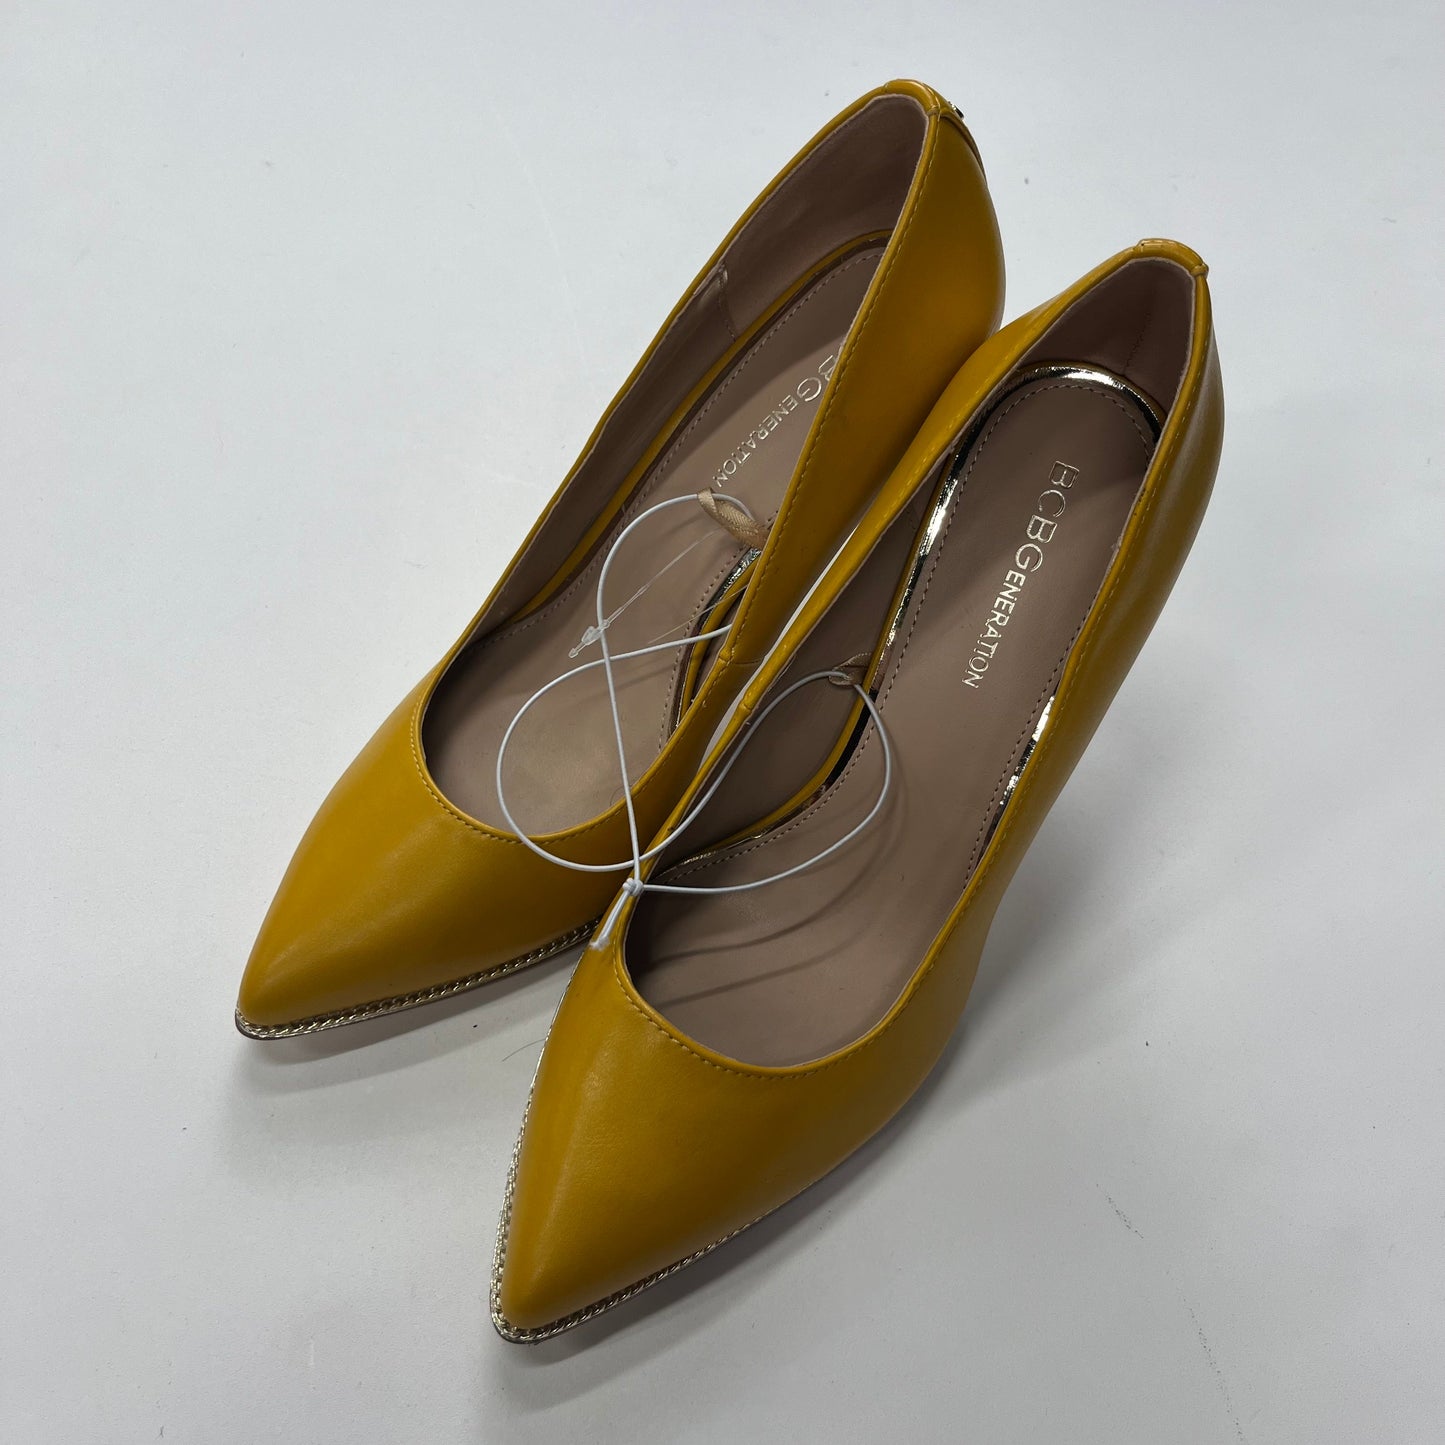 Shoes Heels D Orsay By Bcbg  Size: 8.5